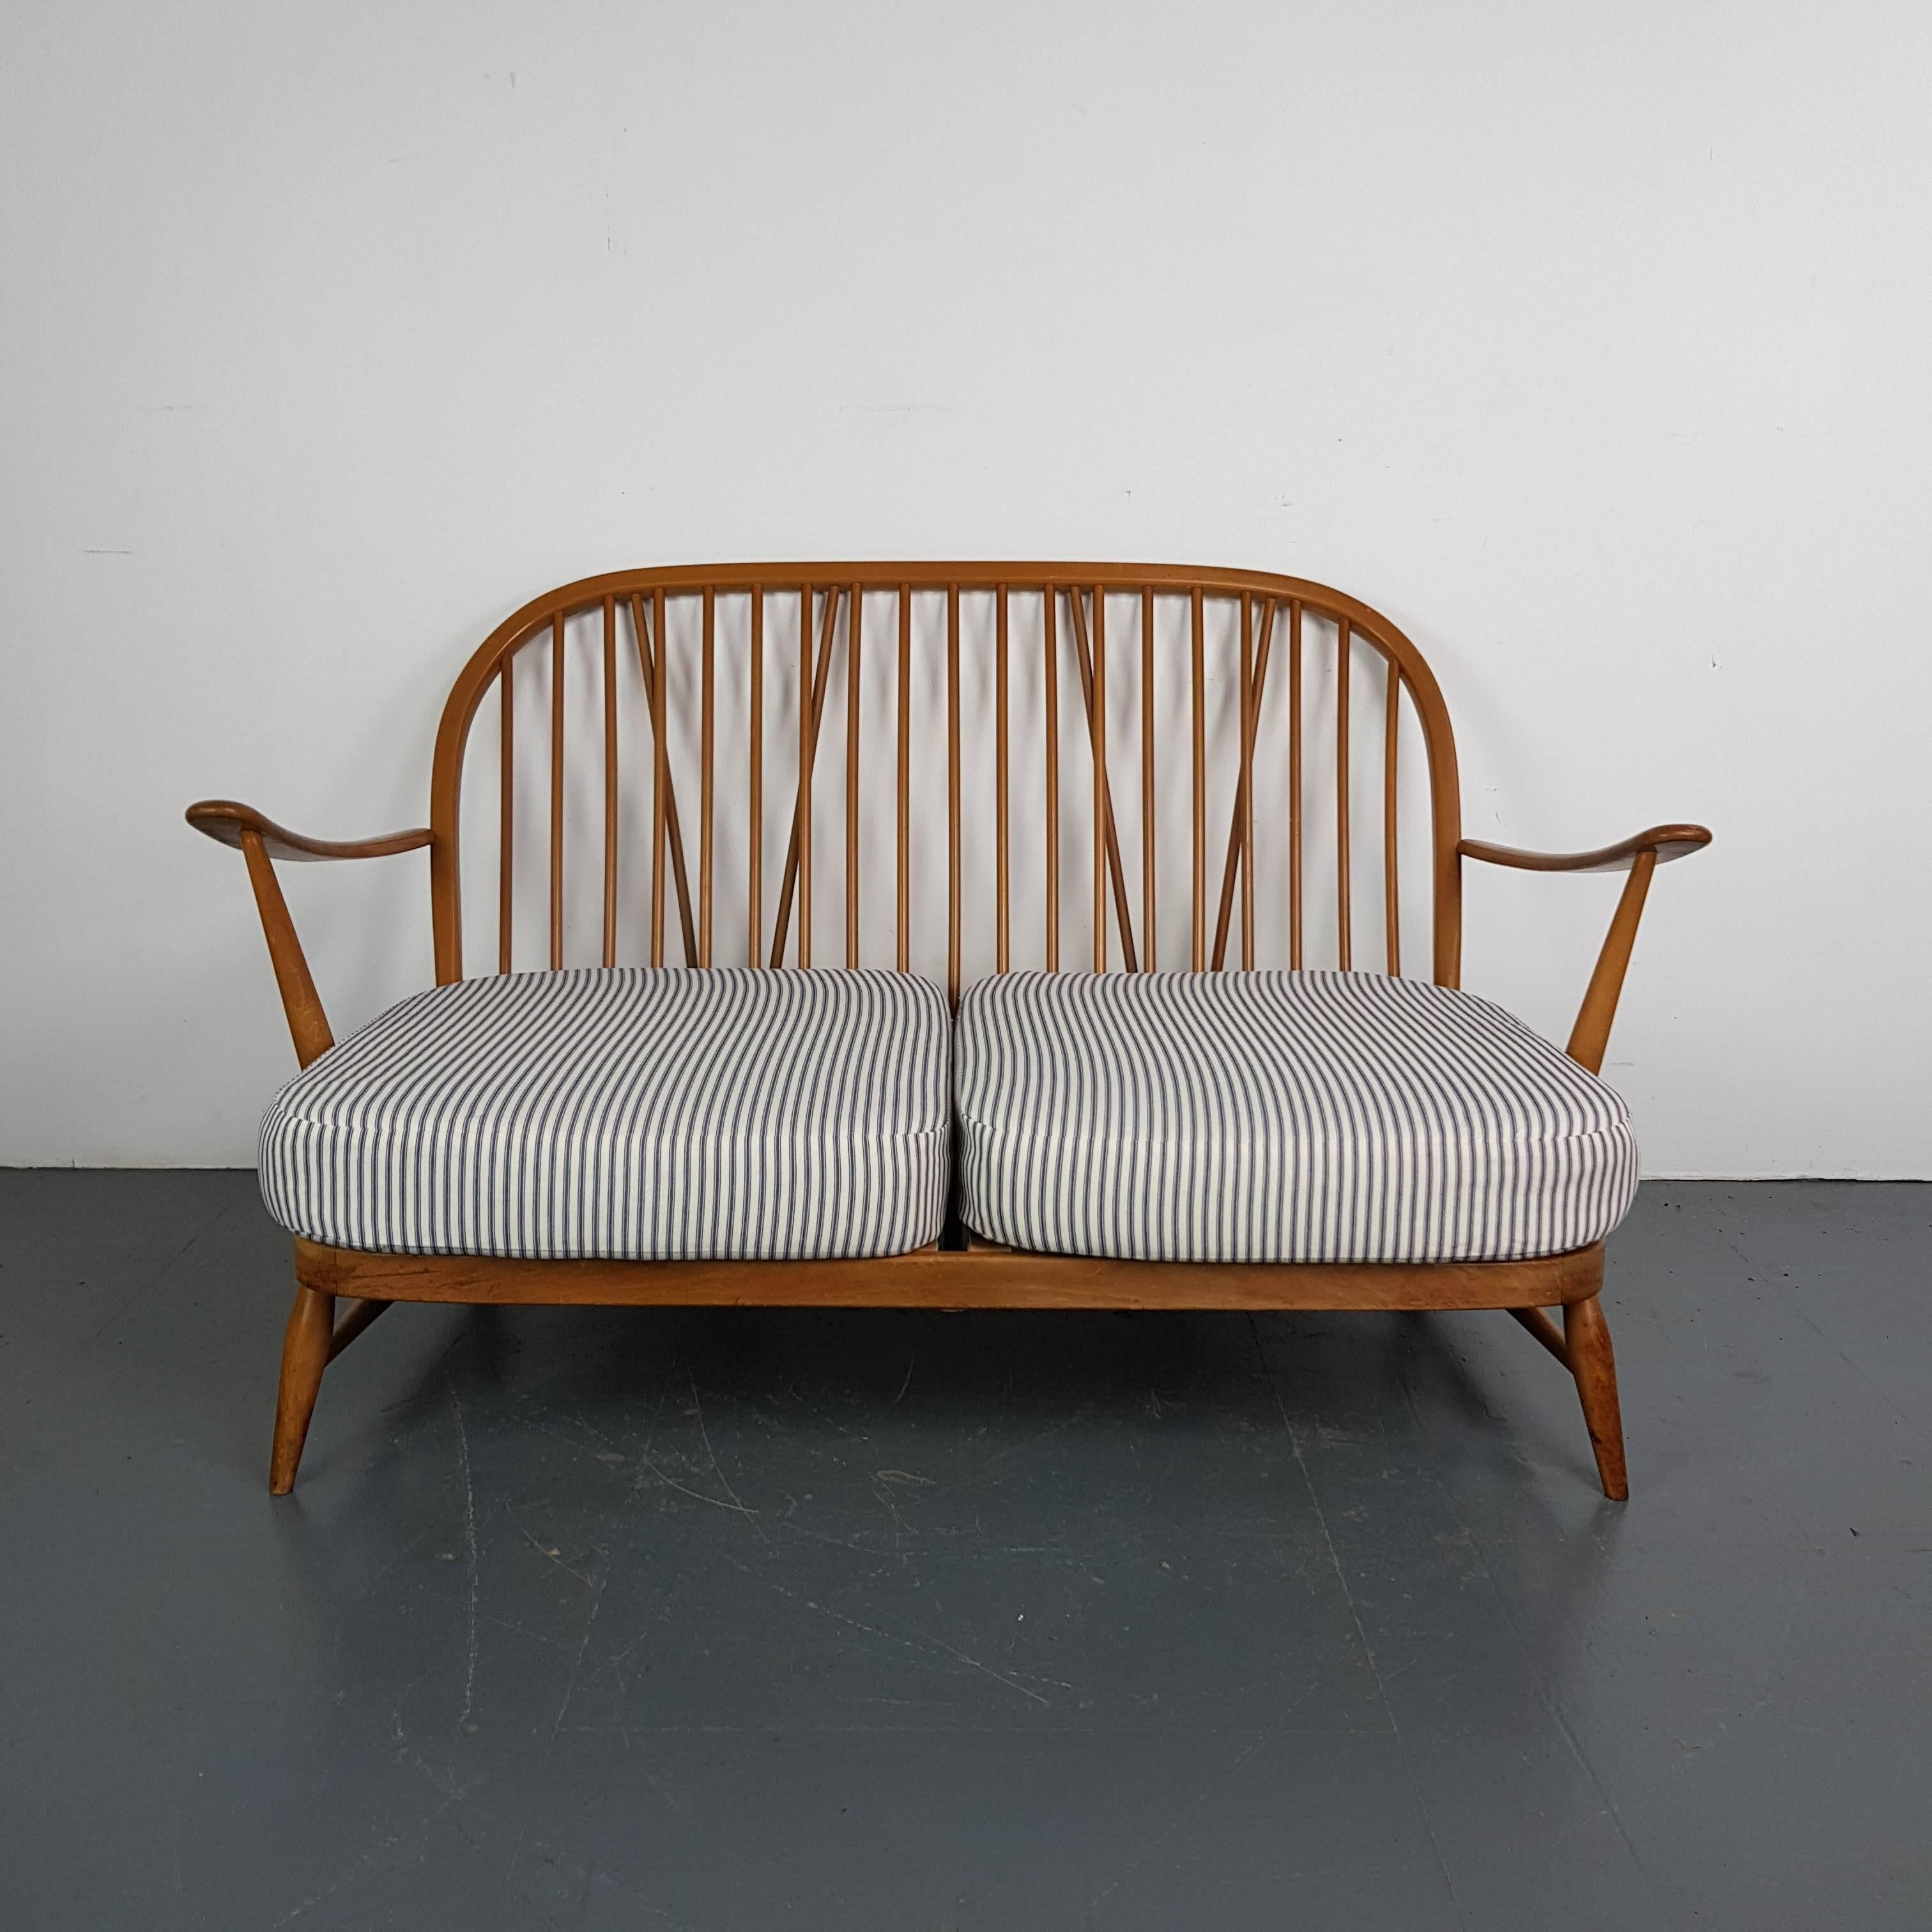 English Refurbished Vintage Ercol Windsor Two-Seat Sofa Upholstered in French Ticking